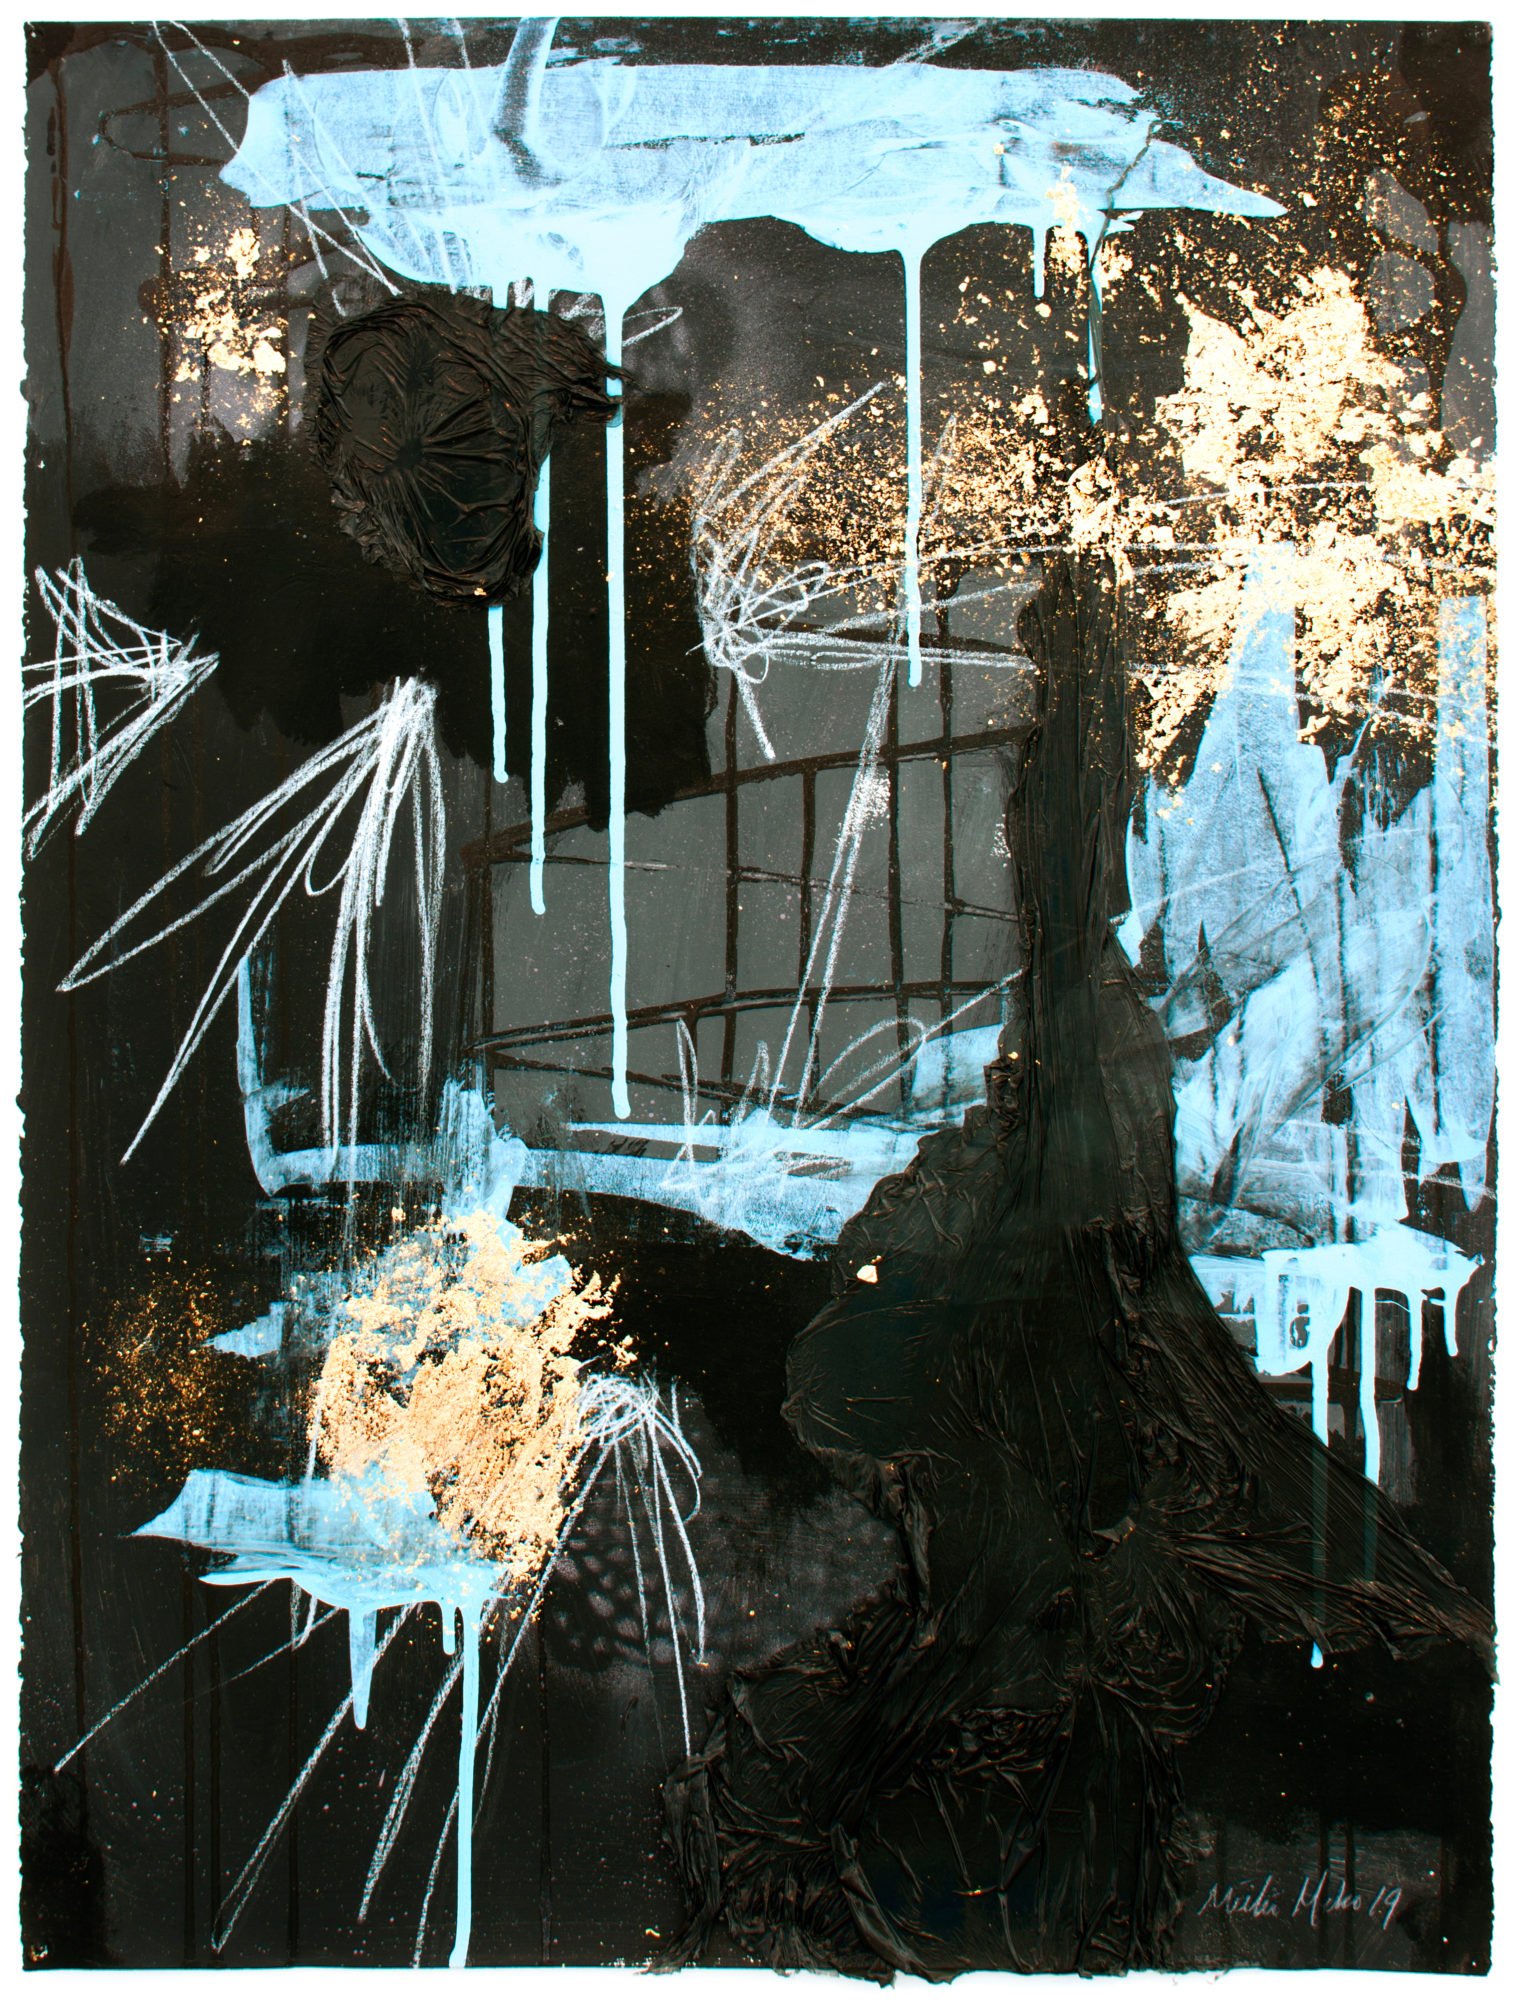 A multi-media work containing black and white elements, gold leaf and various fields of light blue